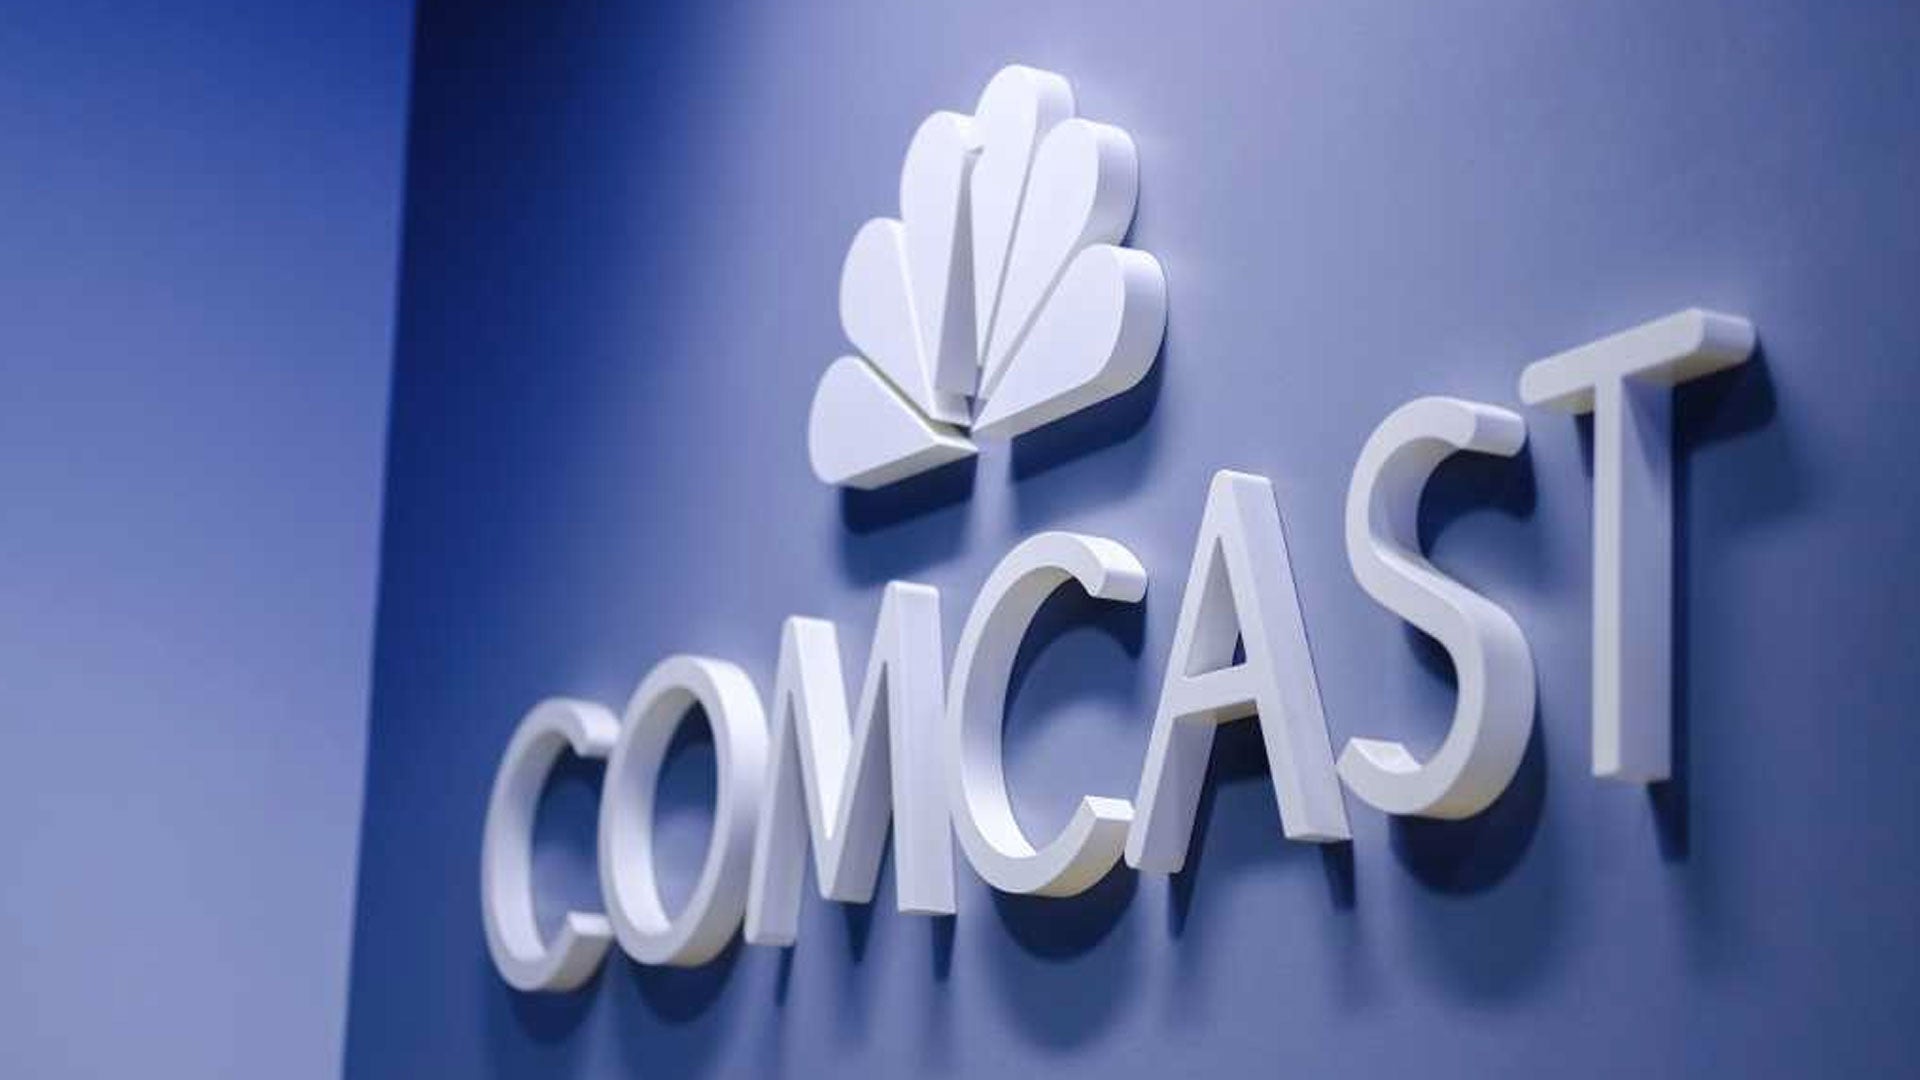 Comcast Sex - Major Victory for Human Dignity': Comcast Cuts Ties with World's Largest  Pornography Site | CBN News